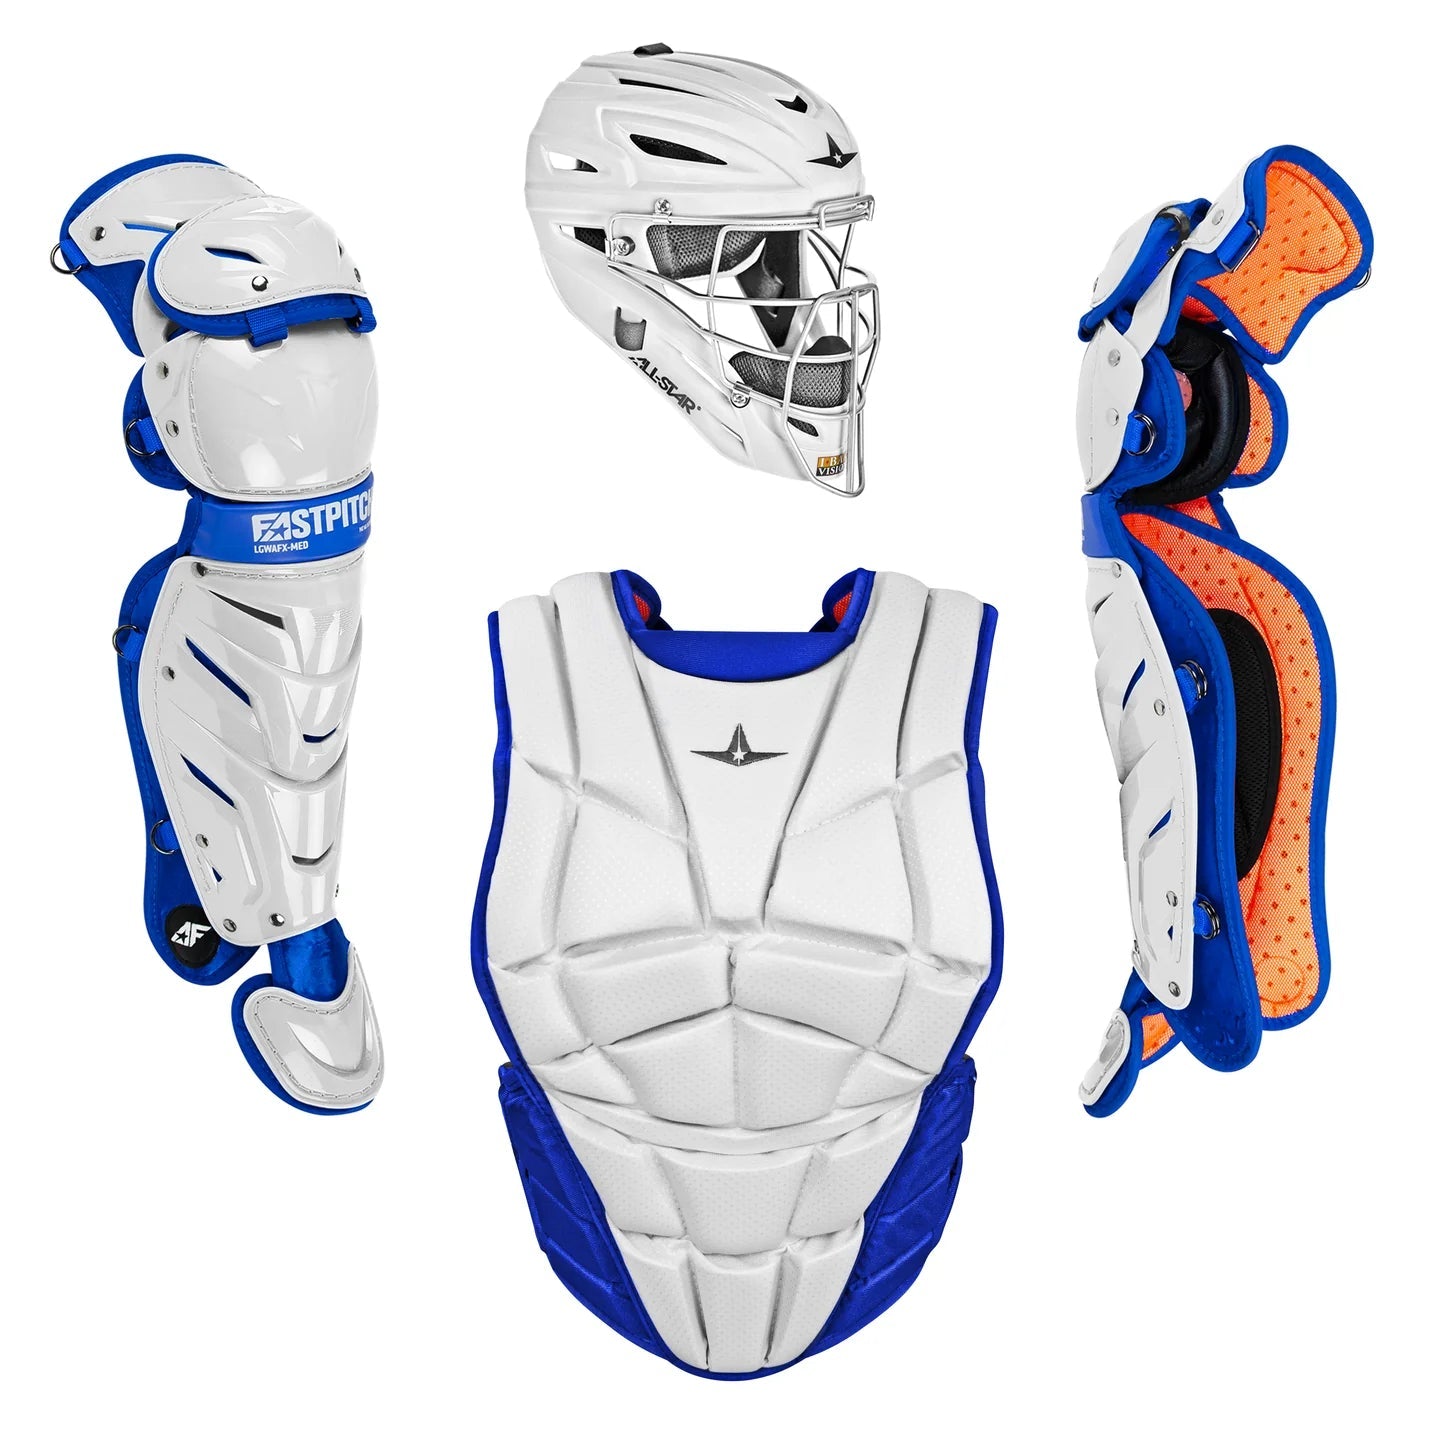 All-Star AFX Fastpitch Catchers Gear Set Kit Small / White/Royal